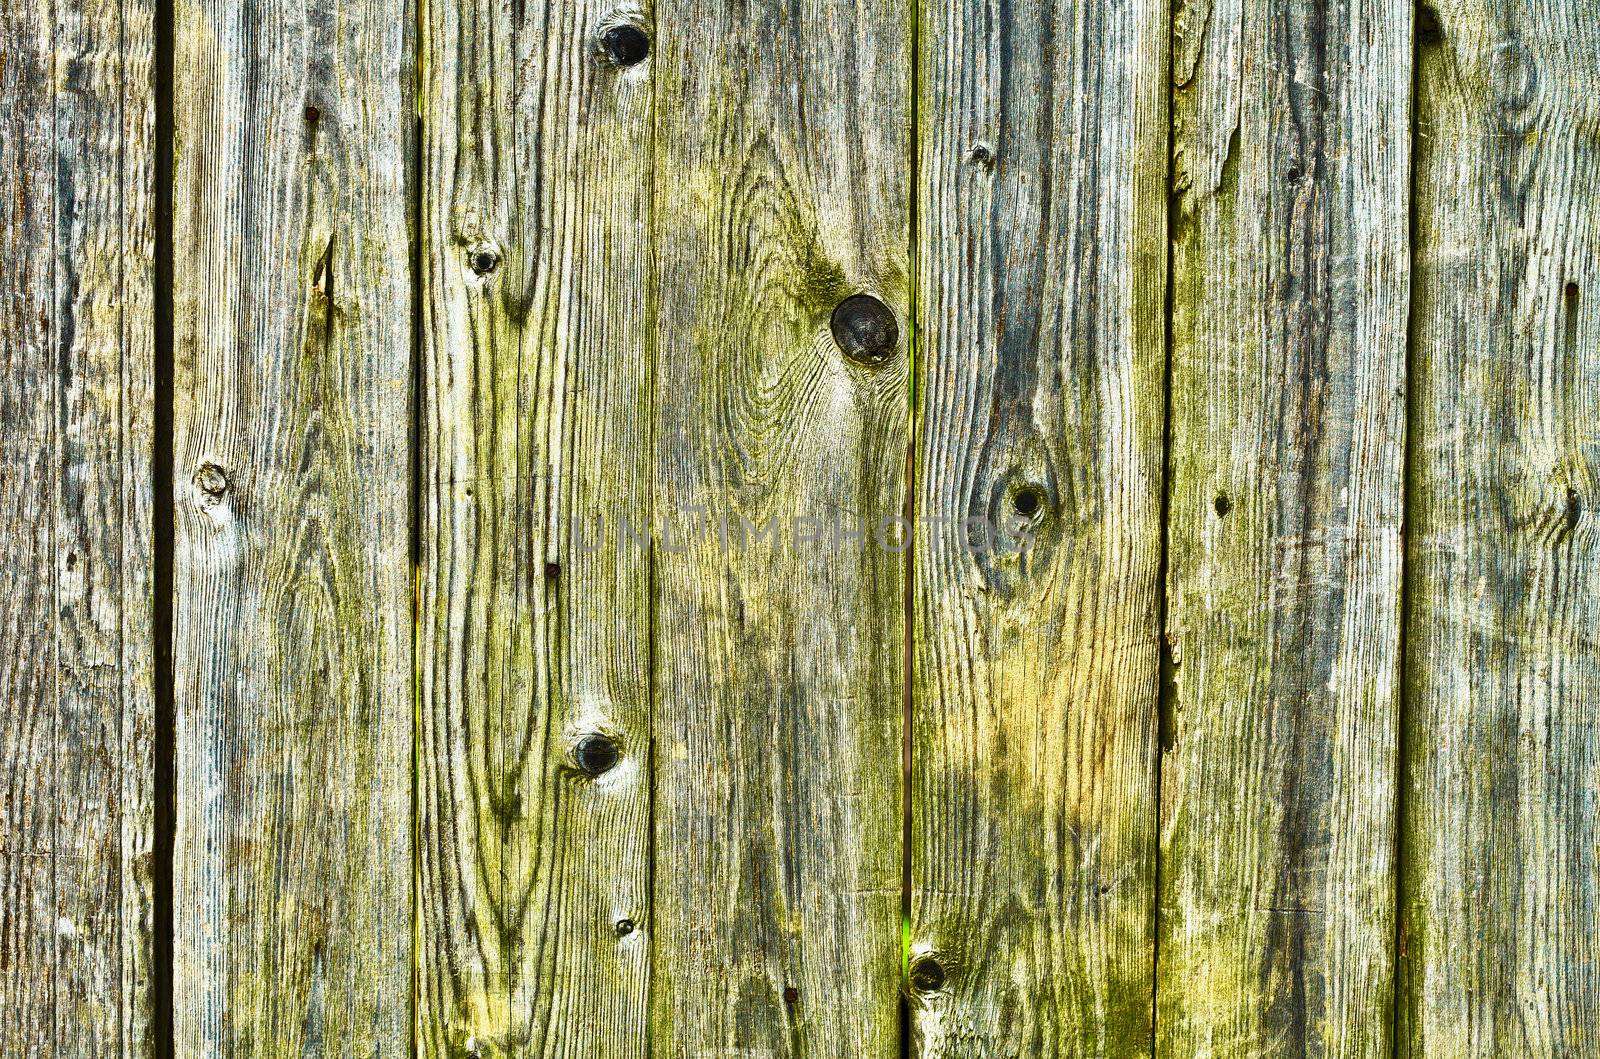 The old, green with damp, wooden fence